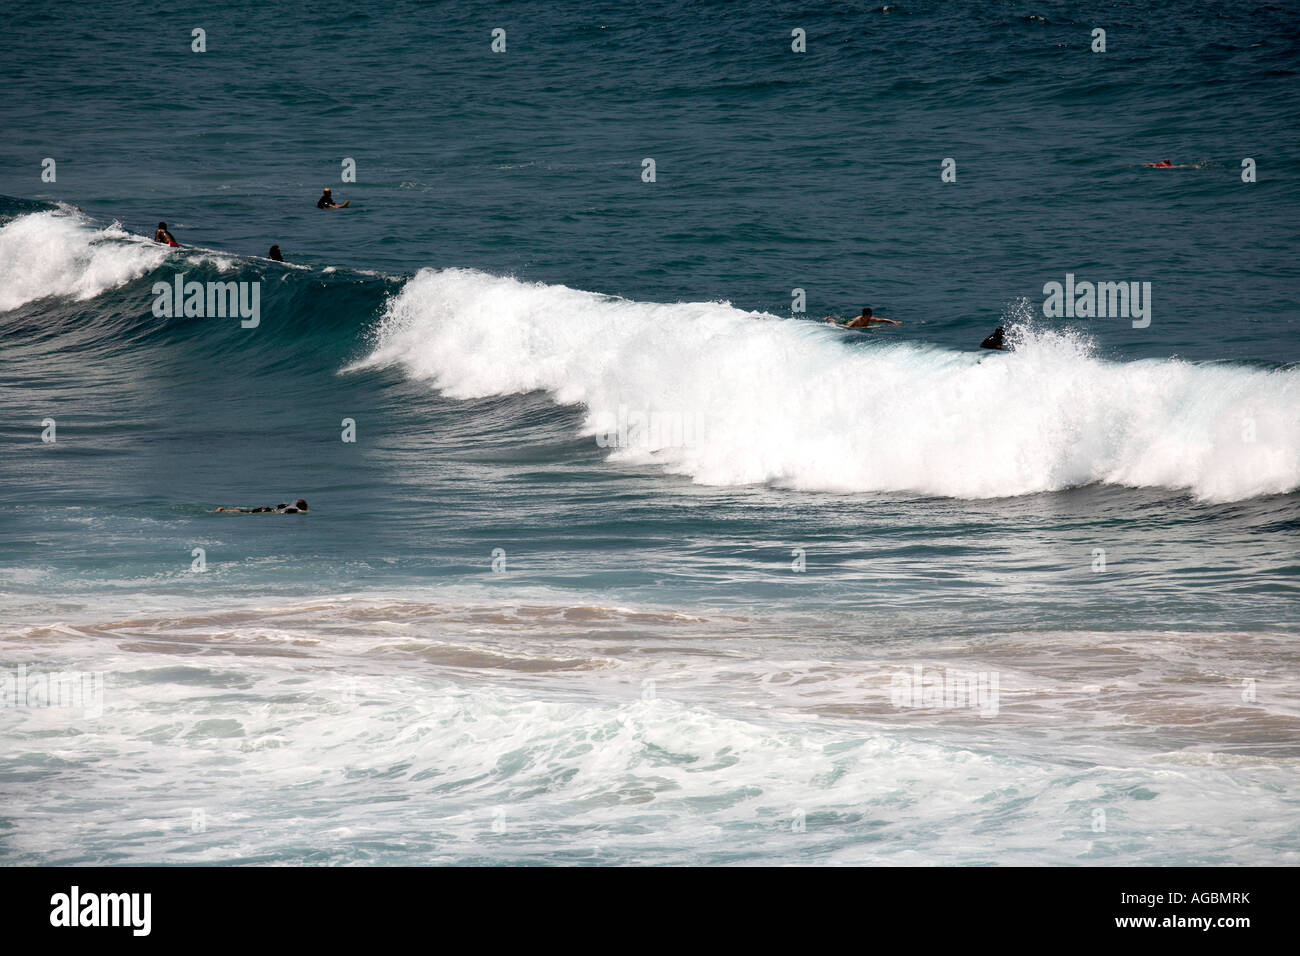 People swimming and waiting for surf waves at Bondi Beach Sydney New South Wales NSW Australia Stock Photo